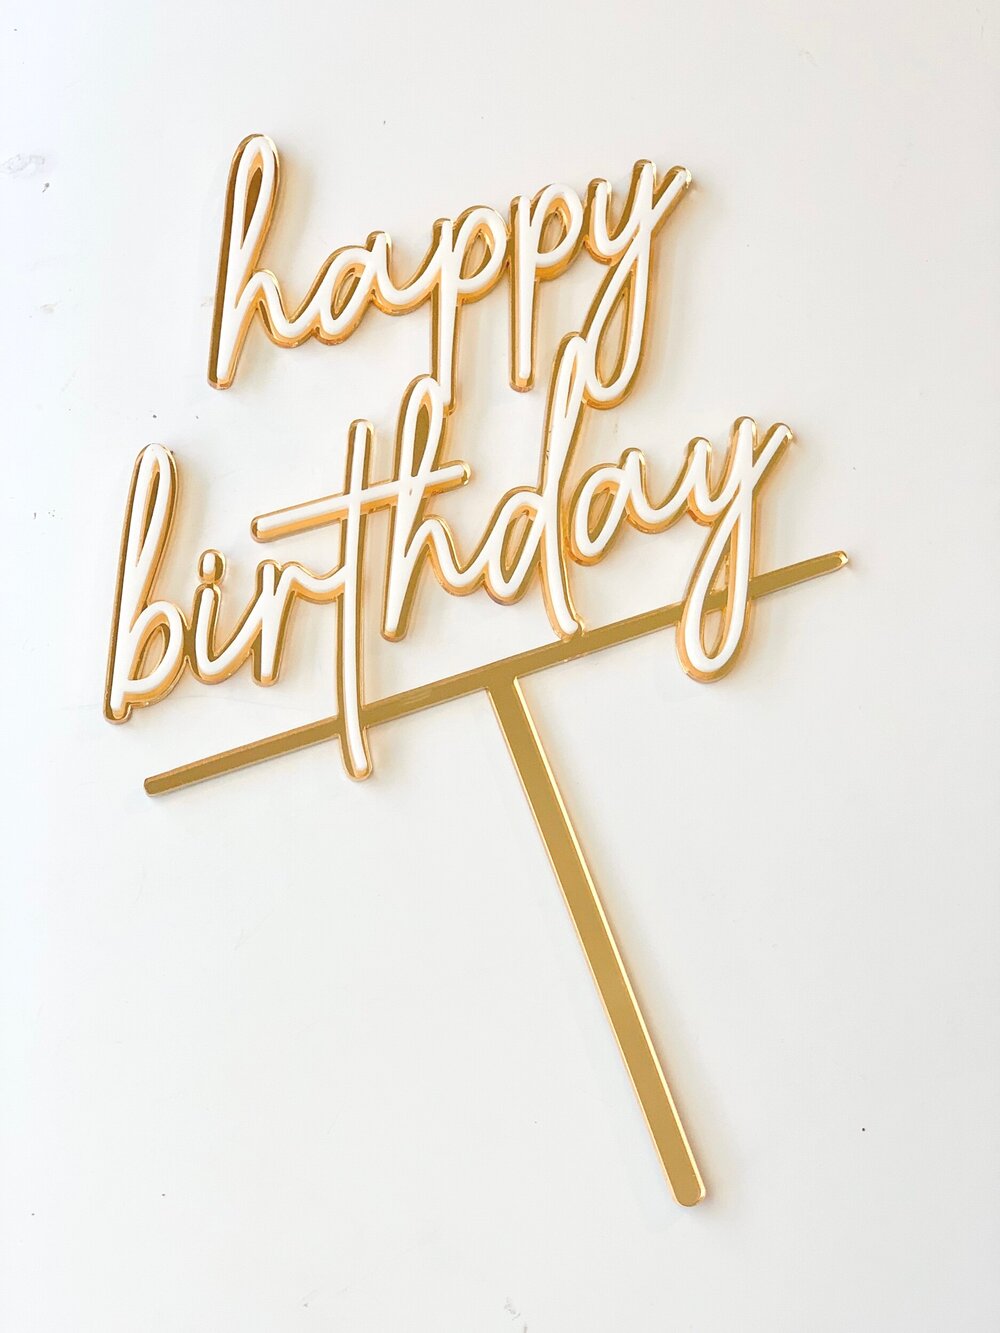 Gold Acrylic Cake Topper with Flower Design Happy Birthday Cake